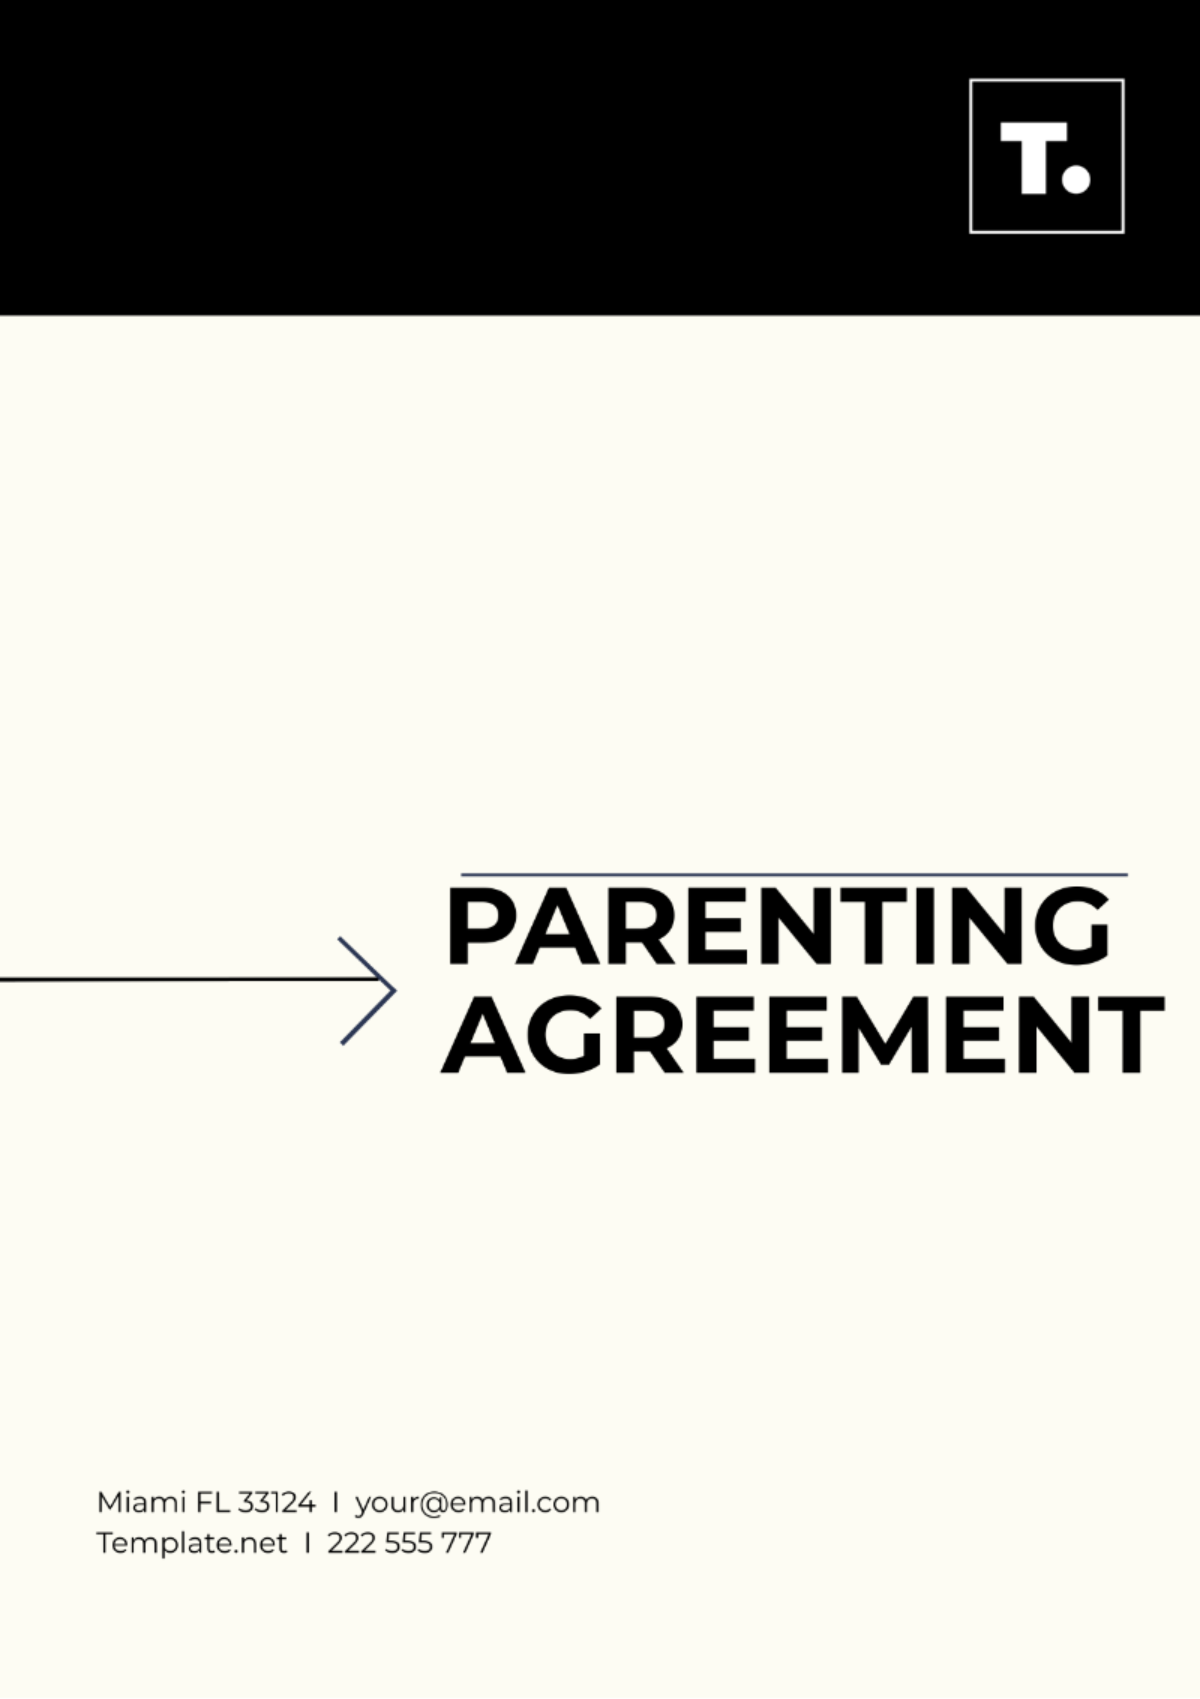 Parenting Agreement Template